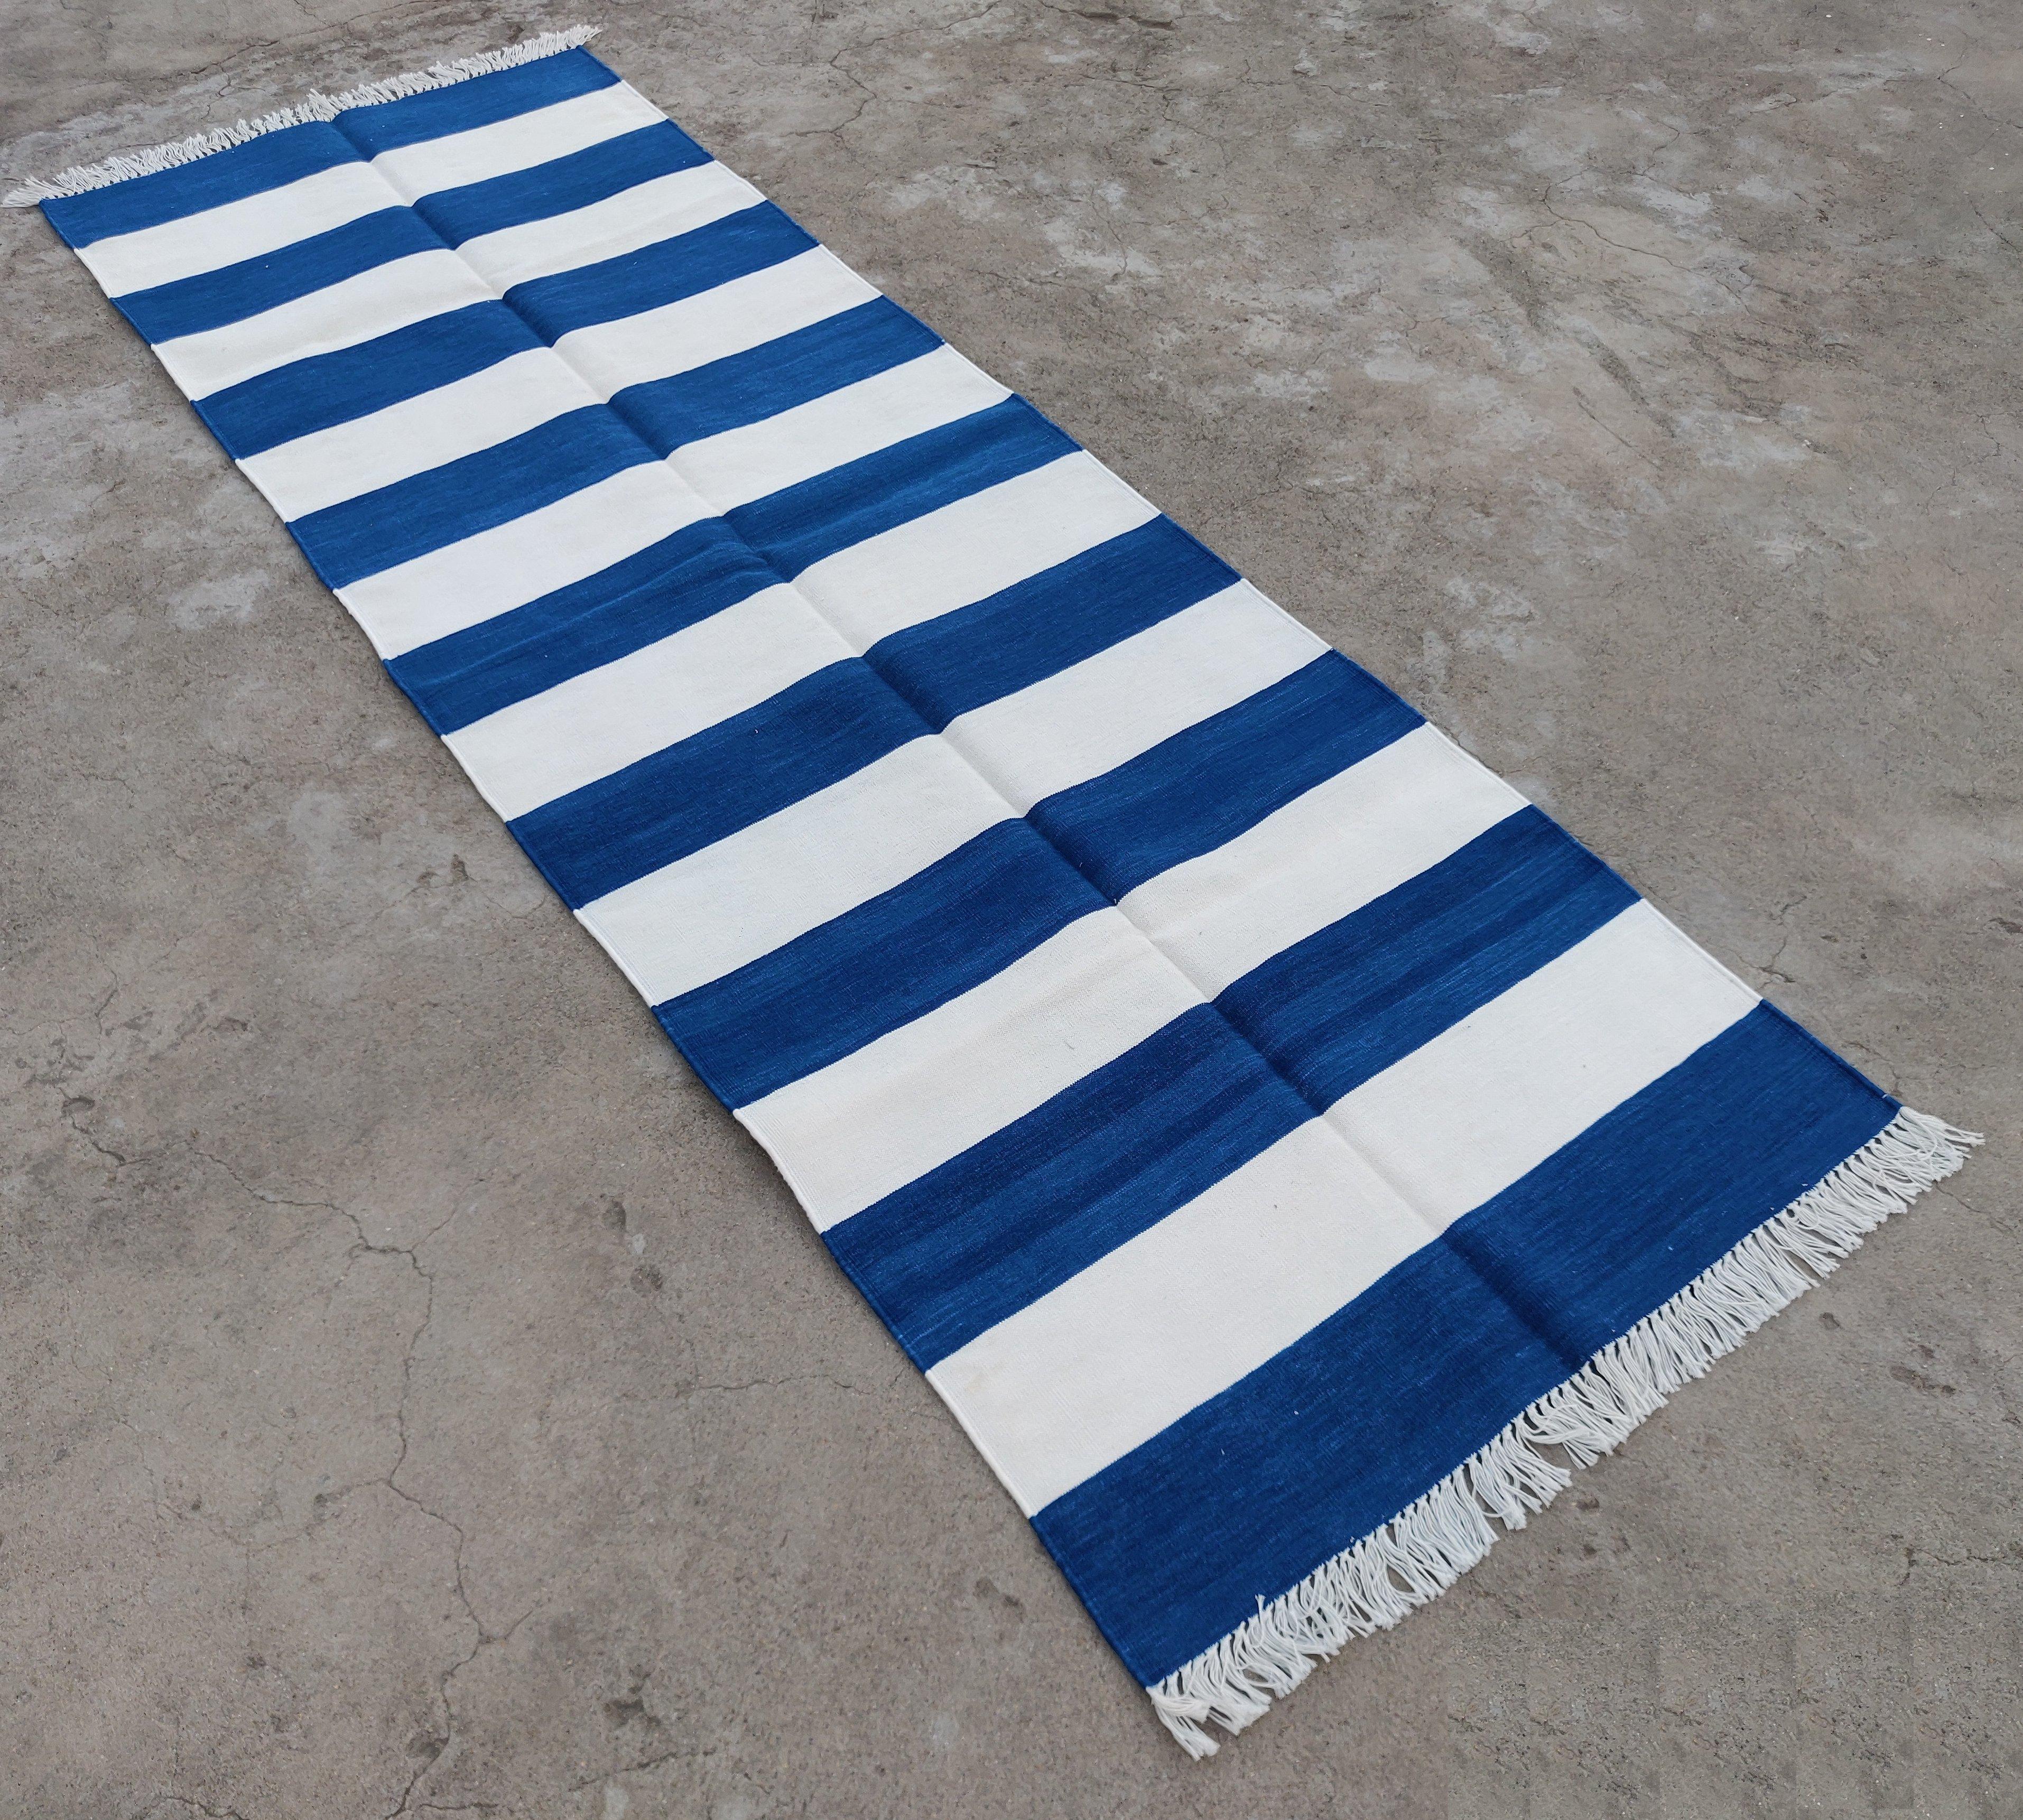 Cotton Natural Vegetable Dyed, Blue And White Striped Indian Dhurrie Runner-2.5x8 (75x240cm)
These special flat-weave dhurries are hand-woven with 15 ply 100% cotton yarn. Due to the special manufacturing techniques used to create our rugs, the size